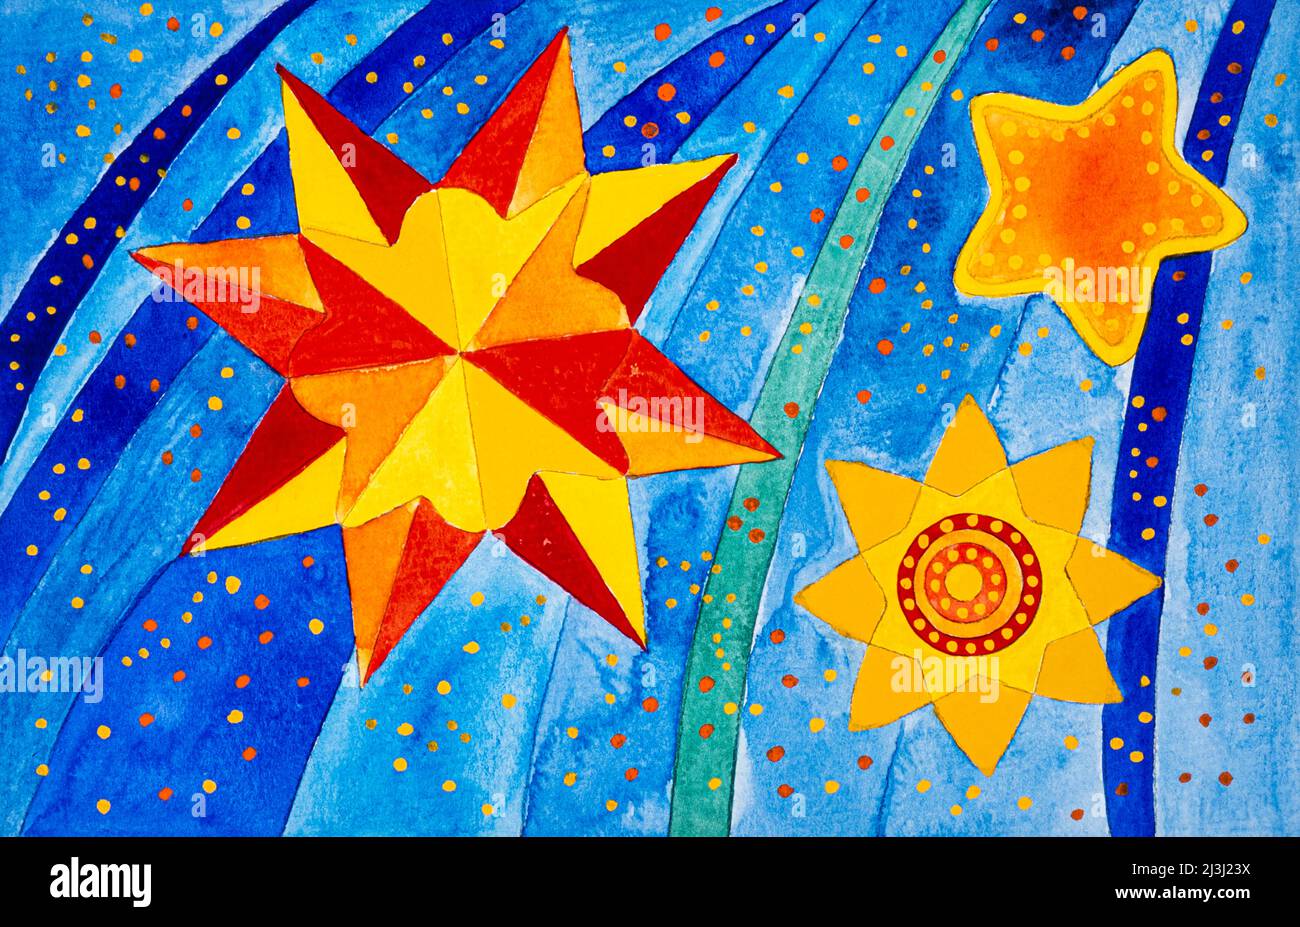 Big Star High Resolution Stock Photography and Images - Alamy